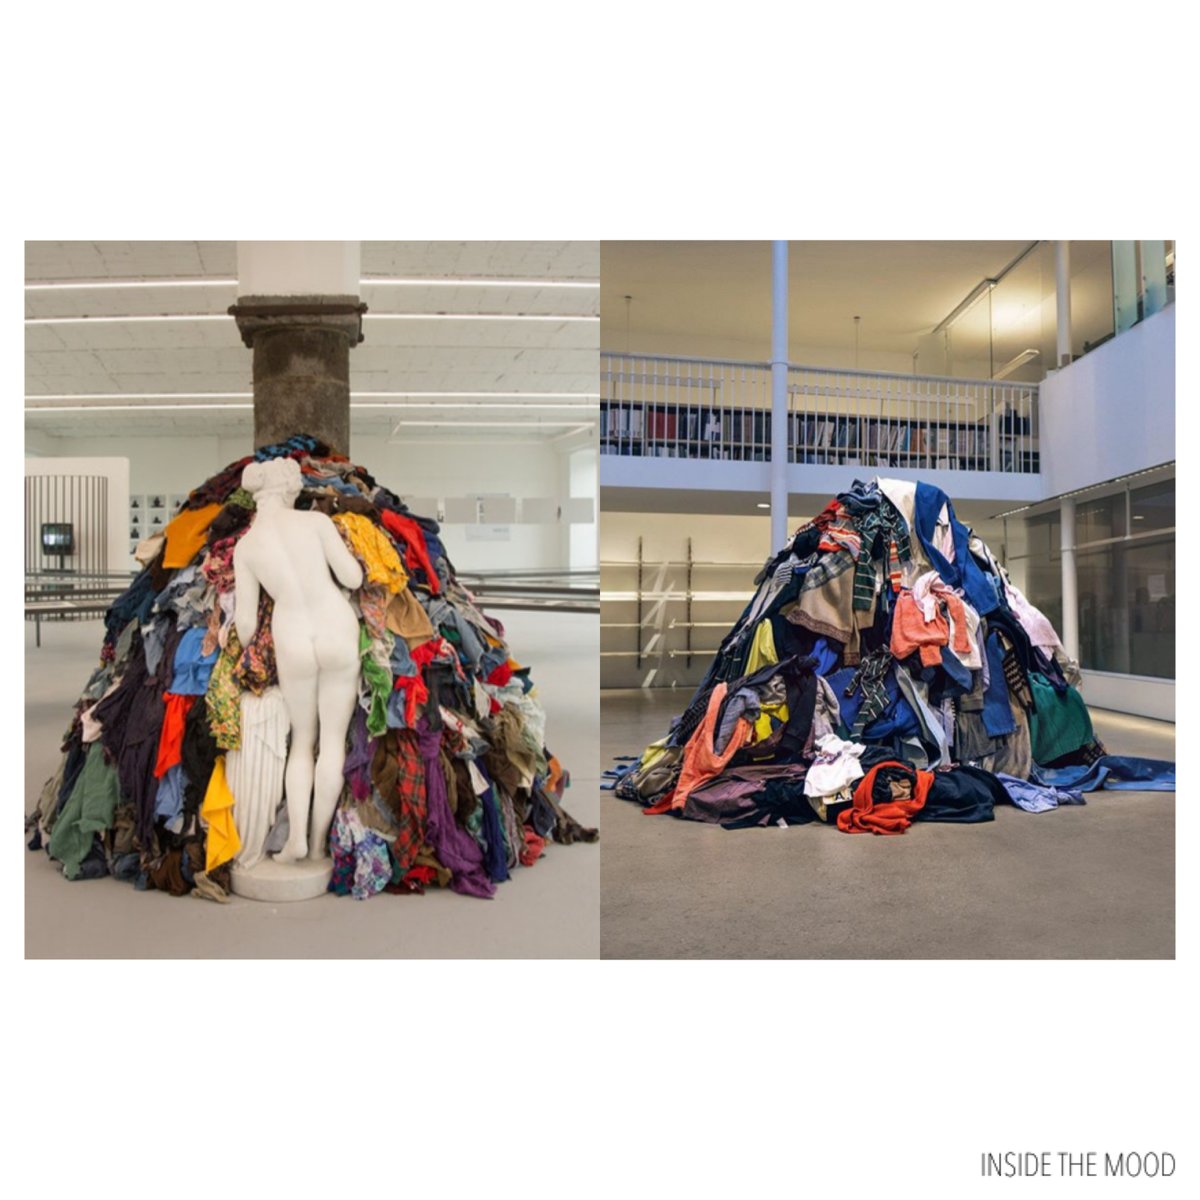 FROM ART: Michelangelo Pistoletto, “Venere degli Stracci” 1967 || A.P.C. Instagram post about their recycling program opening in Hong Kong, 2019 #michelangelopistoletto #artepovera #veneredeglistracci #apc #apcrecycling #artinspiration #insidethemood #apcparis #reducereuserecyvle